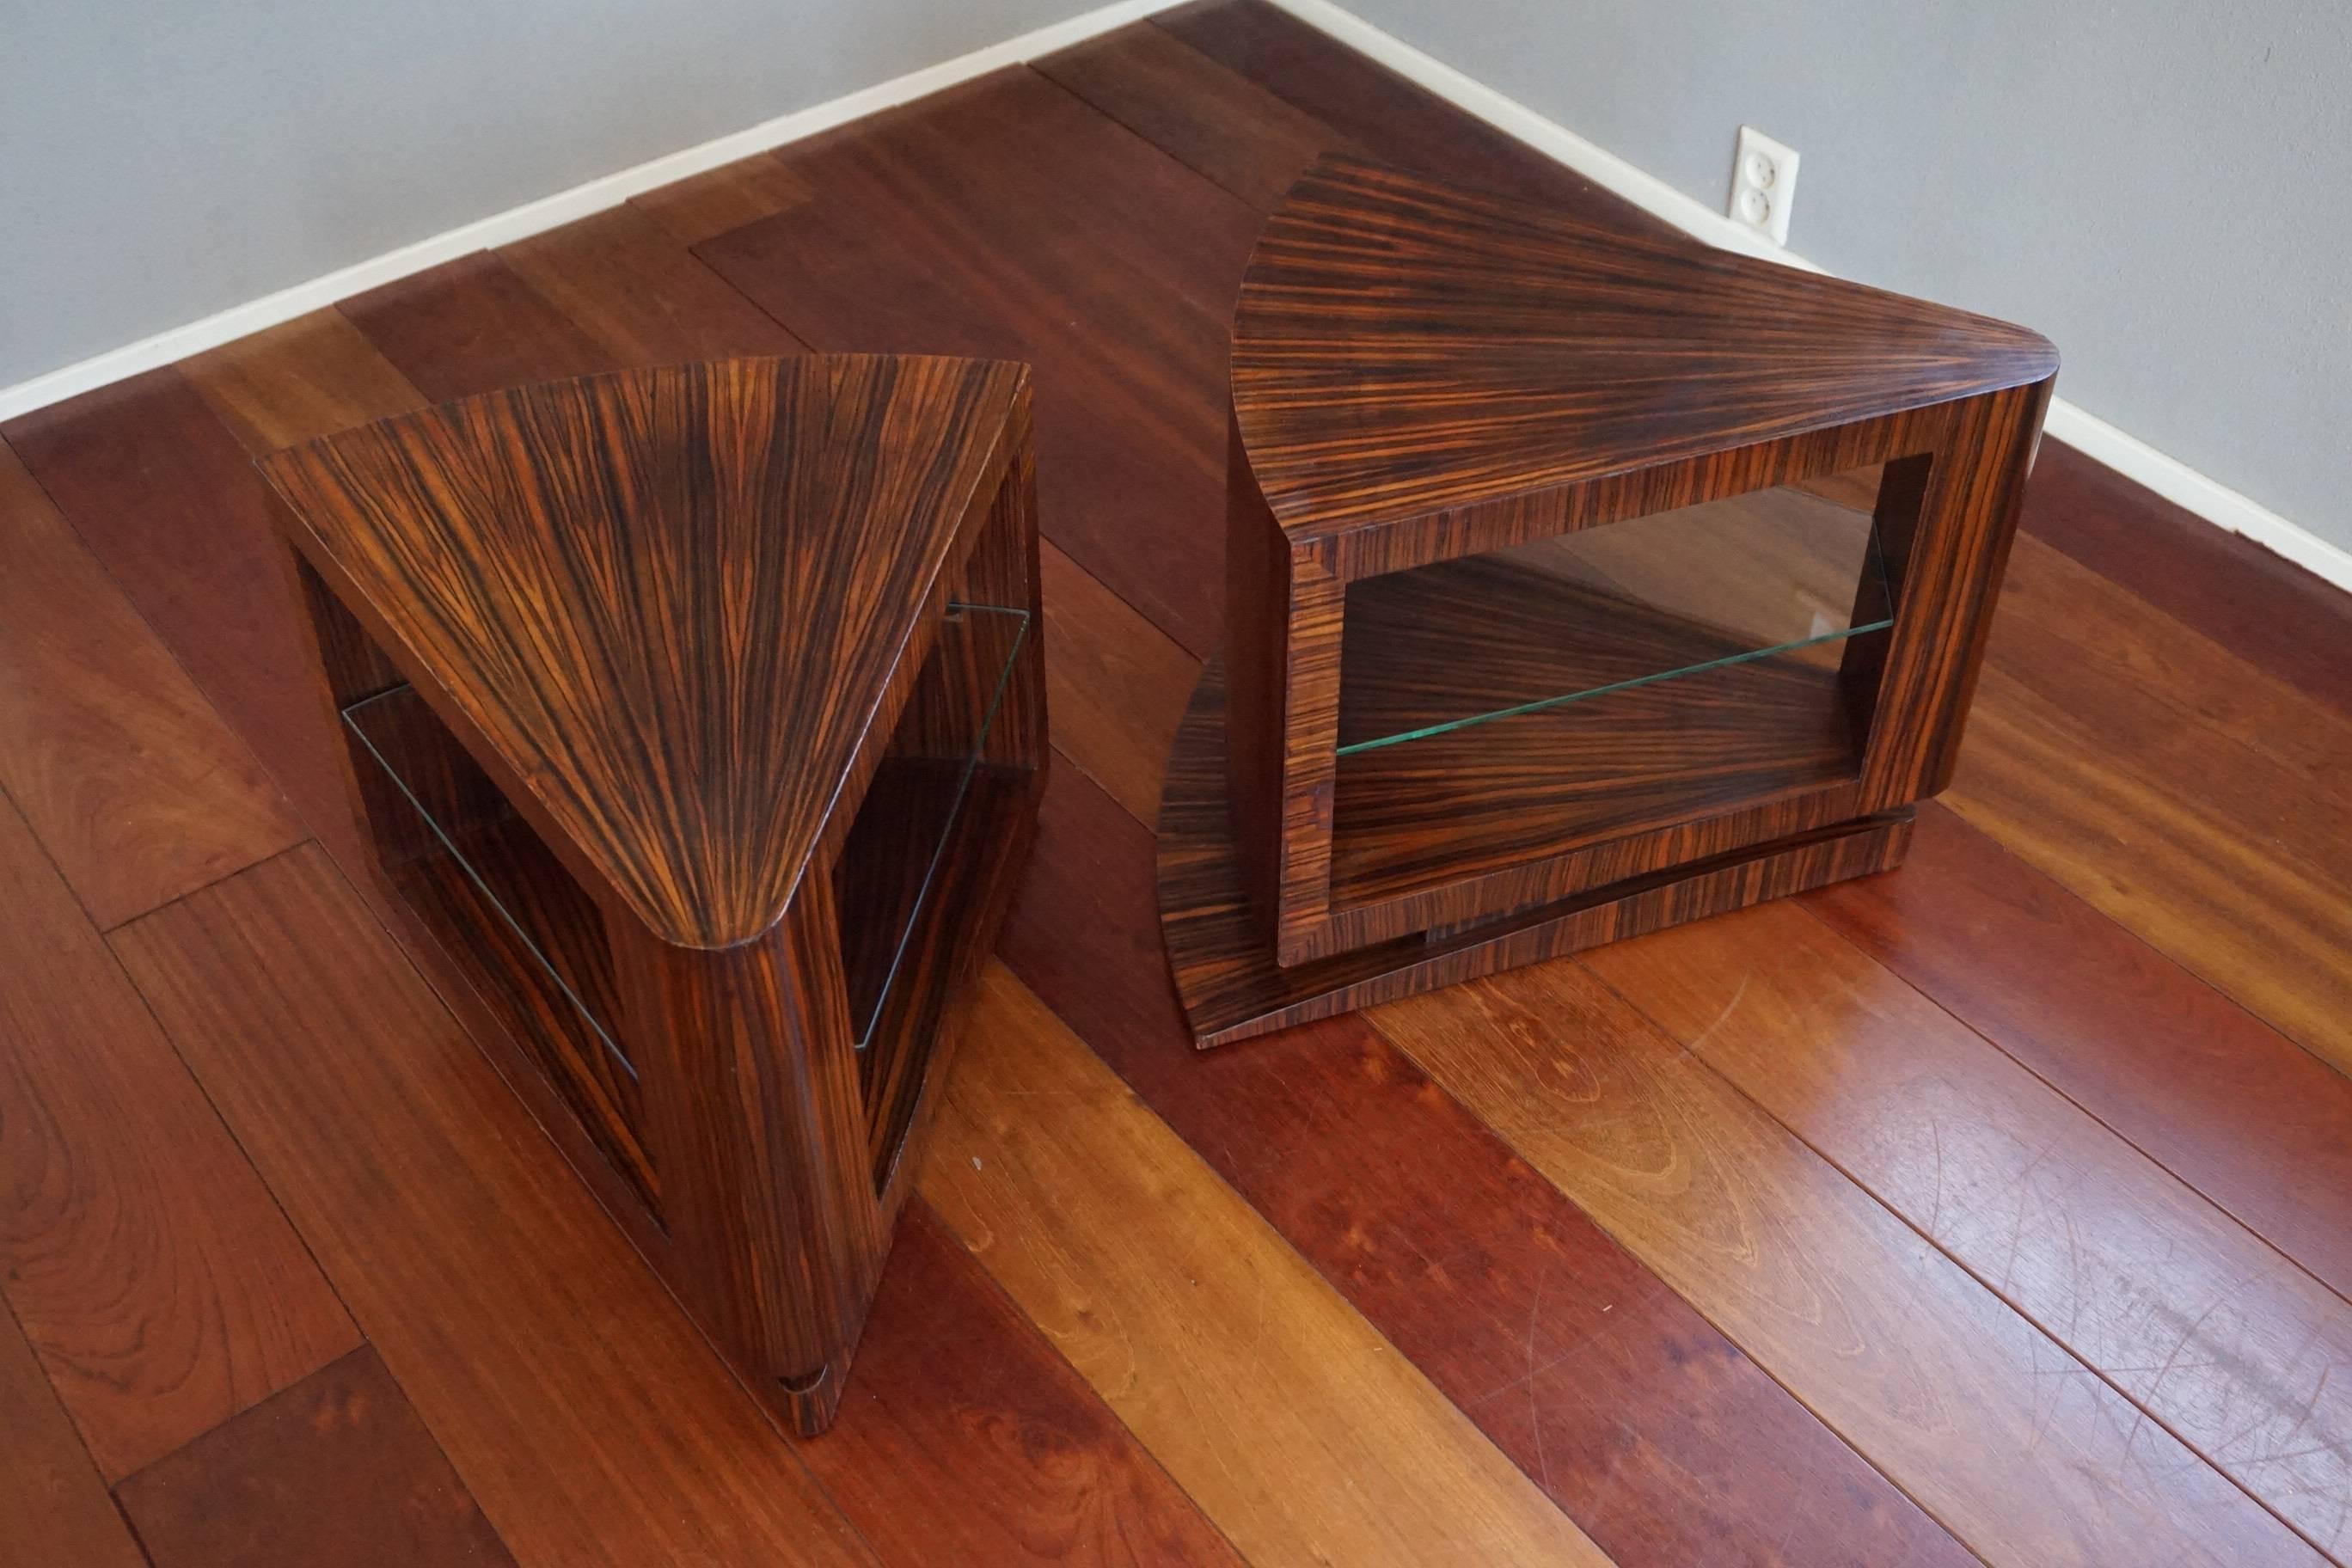 Wonderful pair of hand-crafted 1920's, multi-purpose Art Deco tables.

If you have the right space for this extraordinary and free standing pair of Art Deco tables then they could grace your living space soon. These unique tables or open cabinets